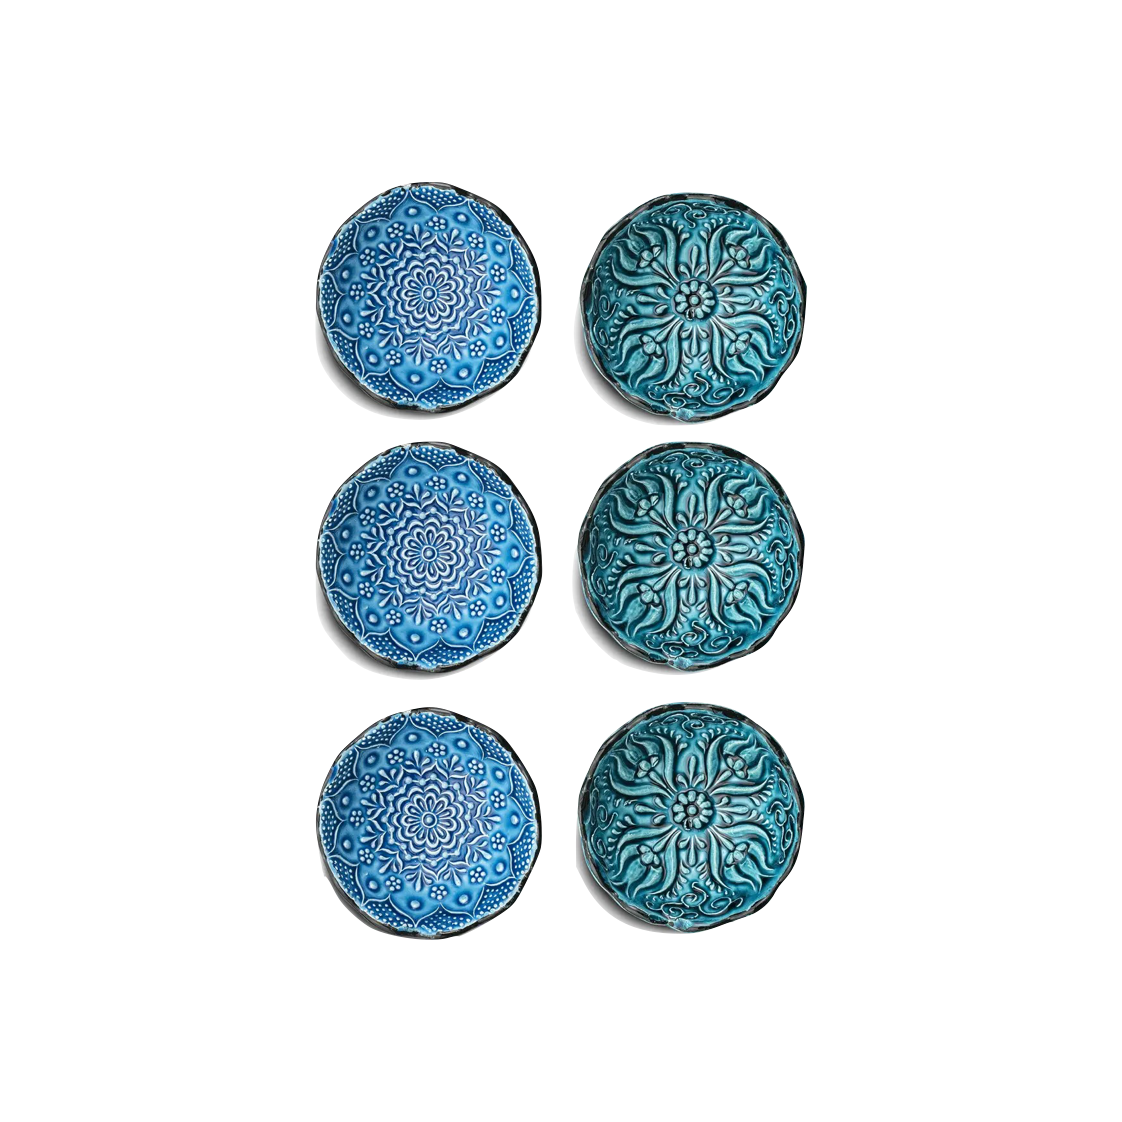 set of six small blue ceramic bowls, three in a light blue and three in a teal blue, each with an intricate pattern